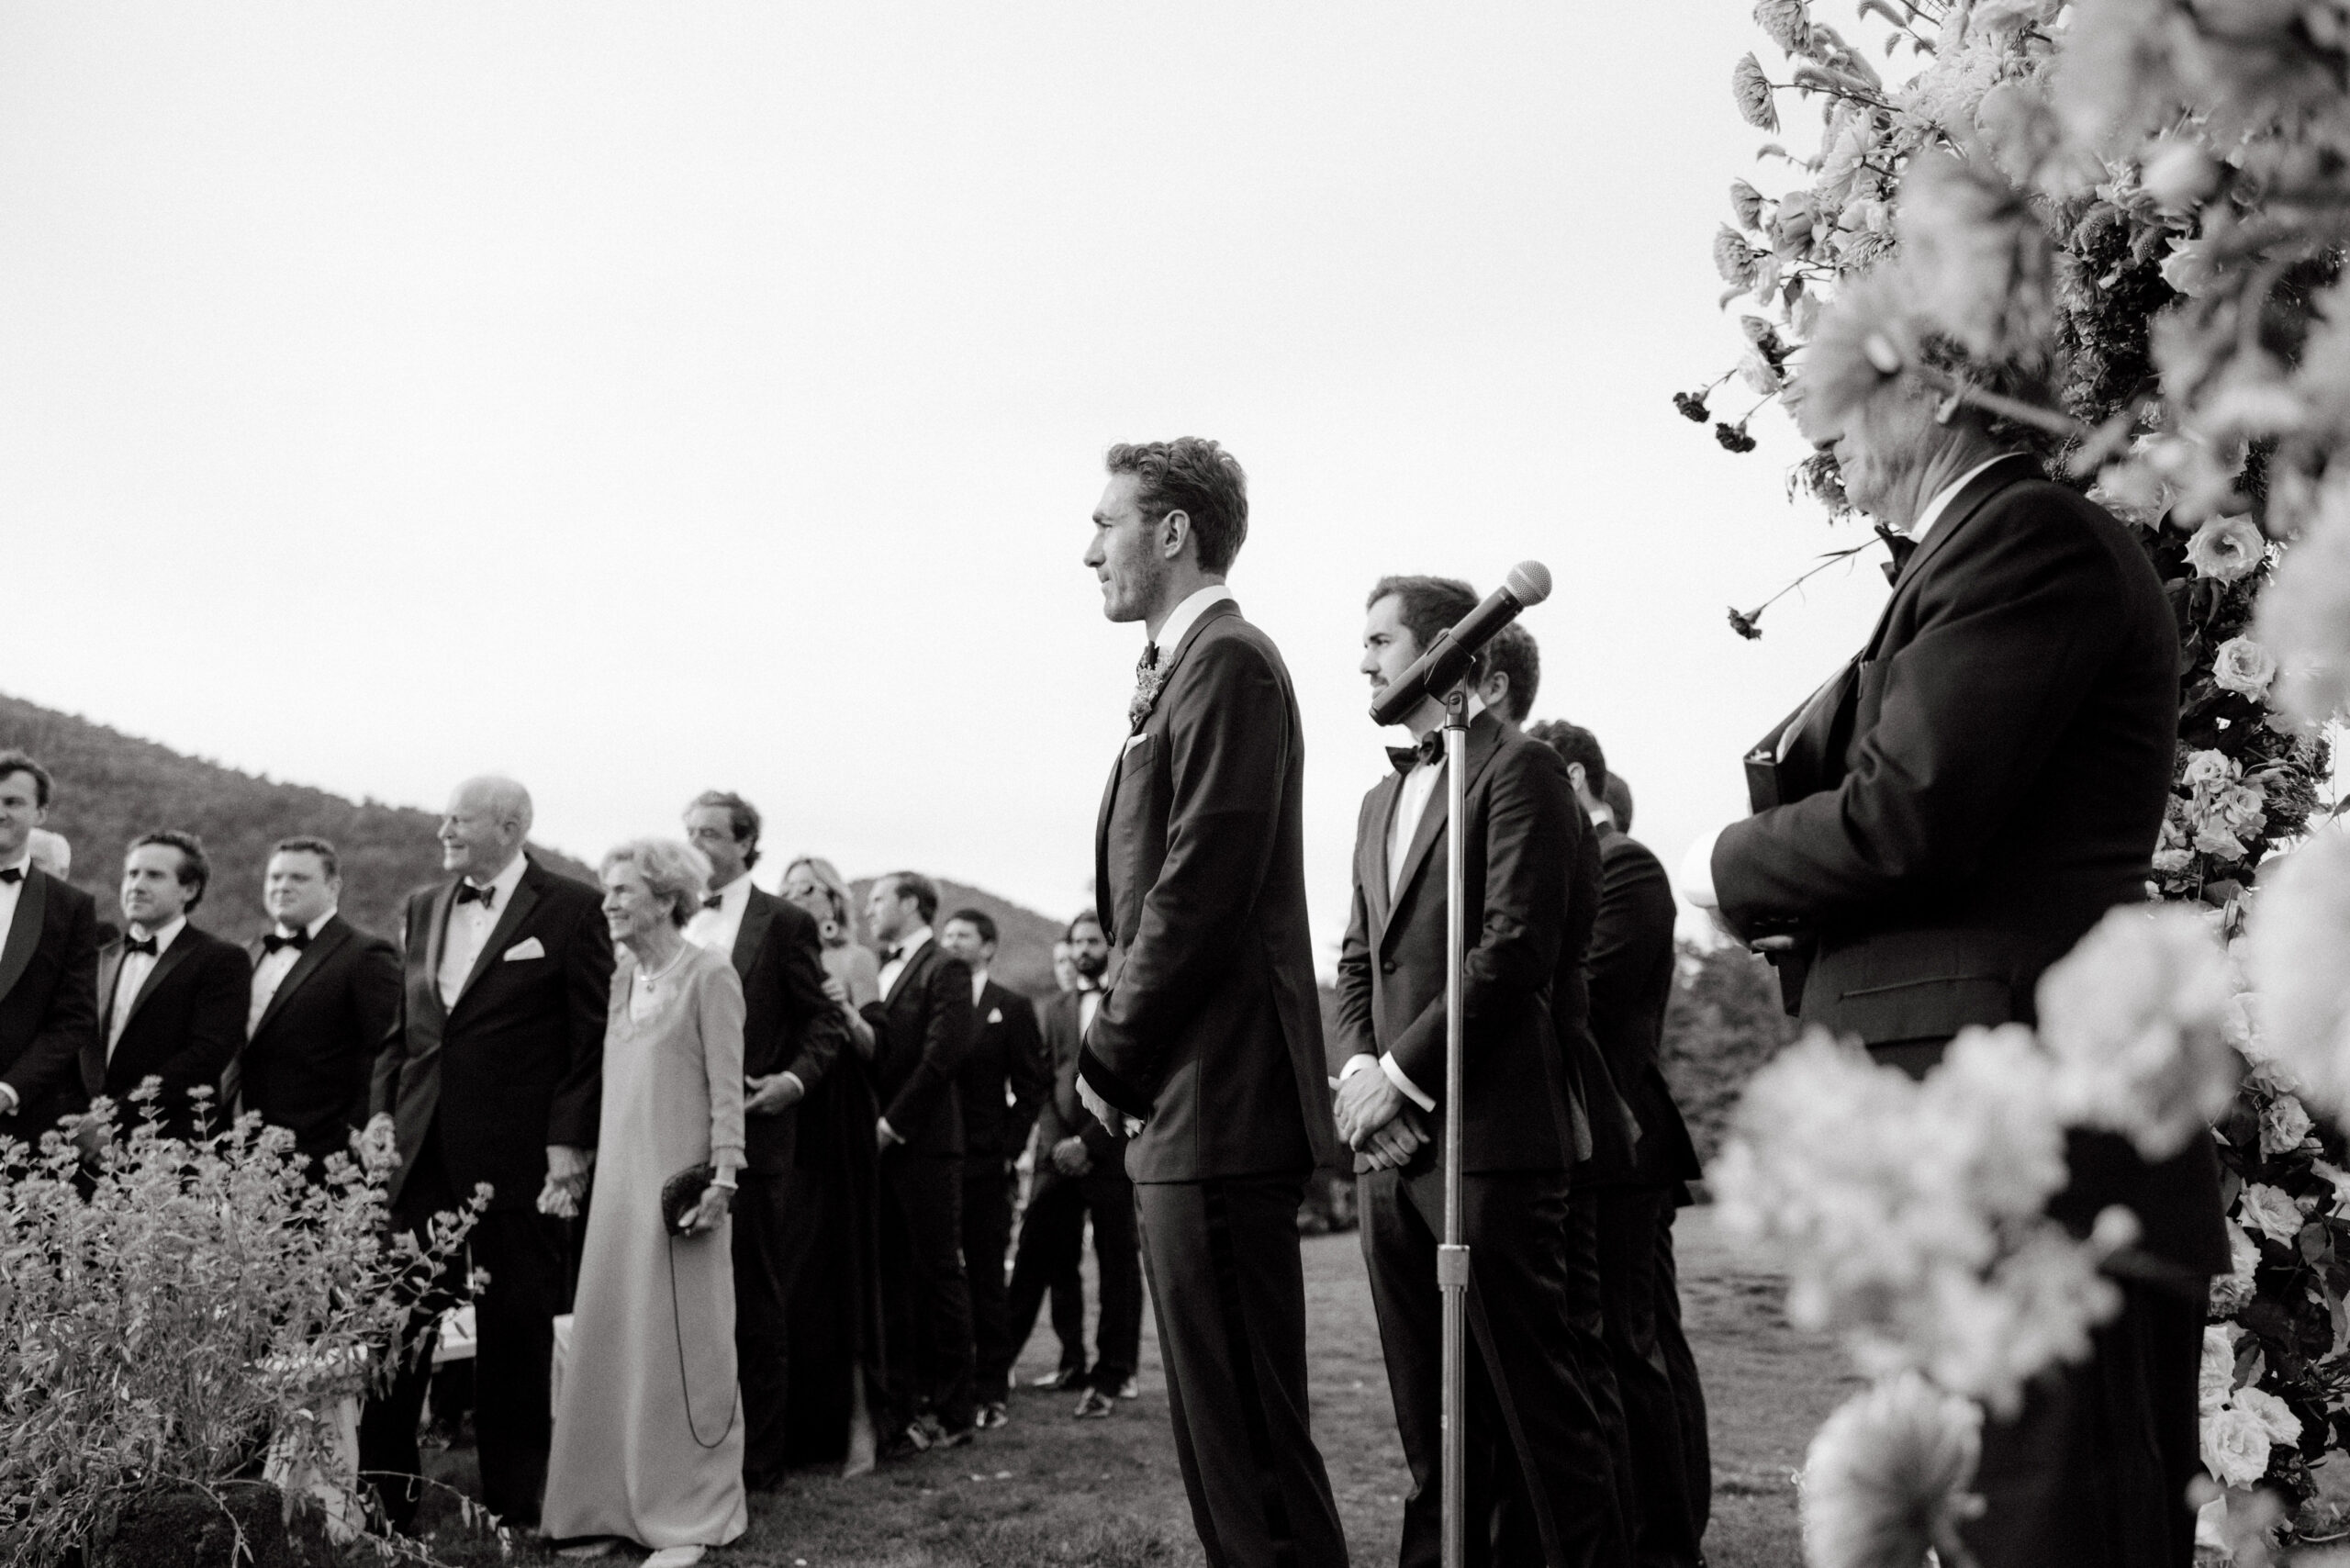 Editorial image of the groom watching the bride go down the aisle. Upstate New York luxury wedding image by Jenny Fu Studio.